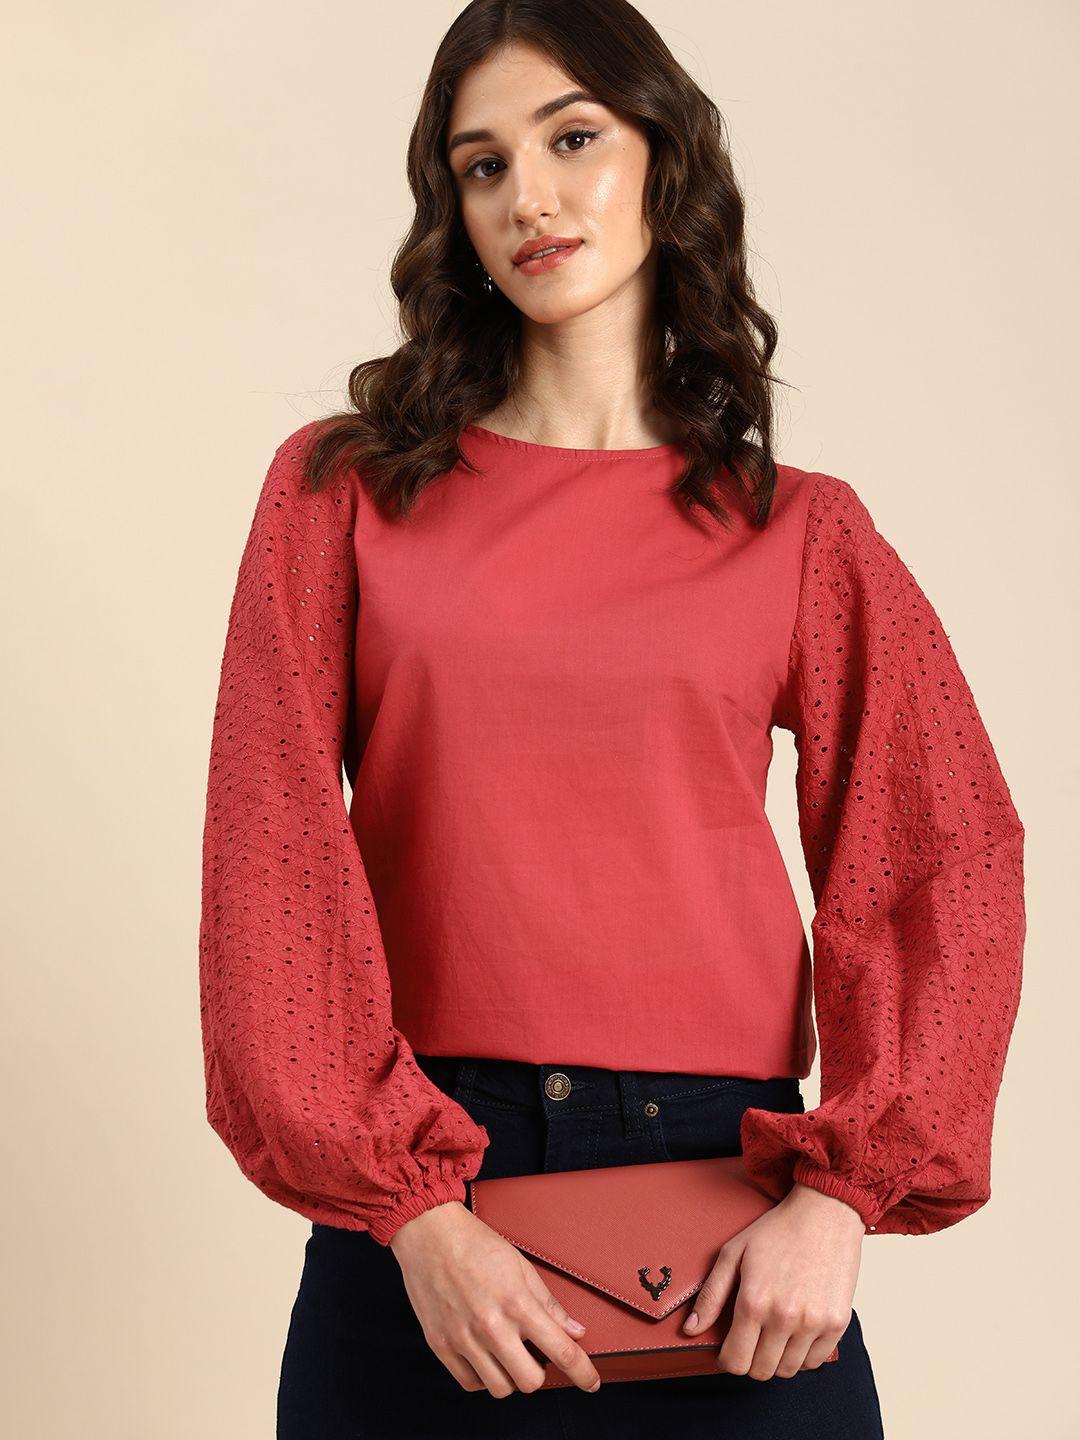 all-about-you-solid-pure-cotton-regular-top-with-embroidered-bishop-sleeves